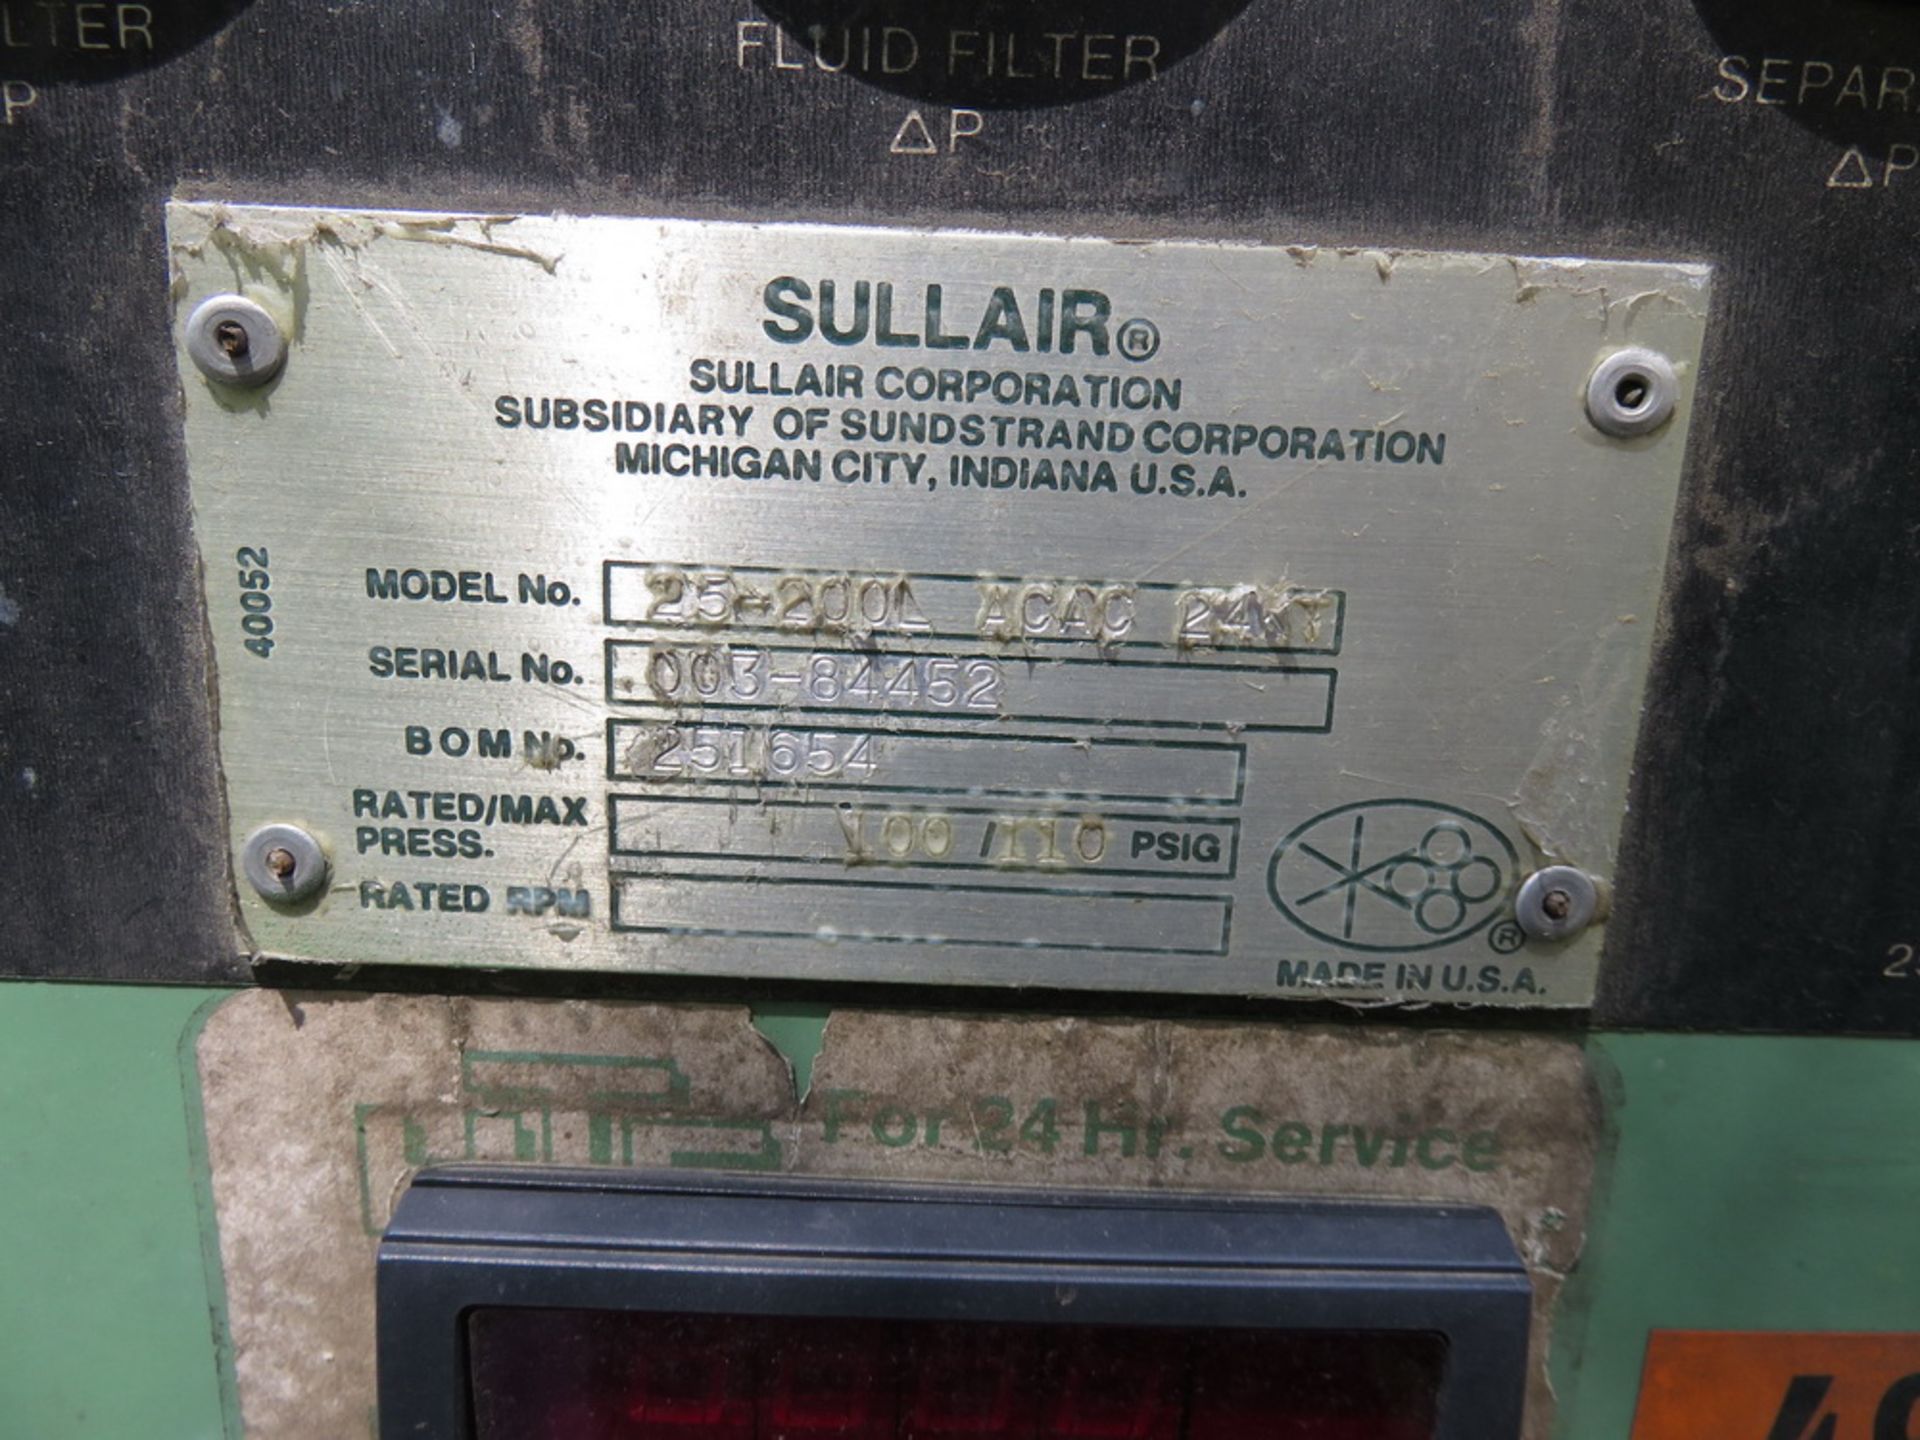 Sullair LS25-200L ACAC 24KT Rotary Screw Air Compressor - Image 3 of 7